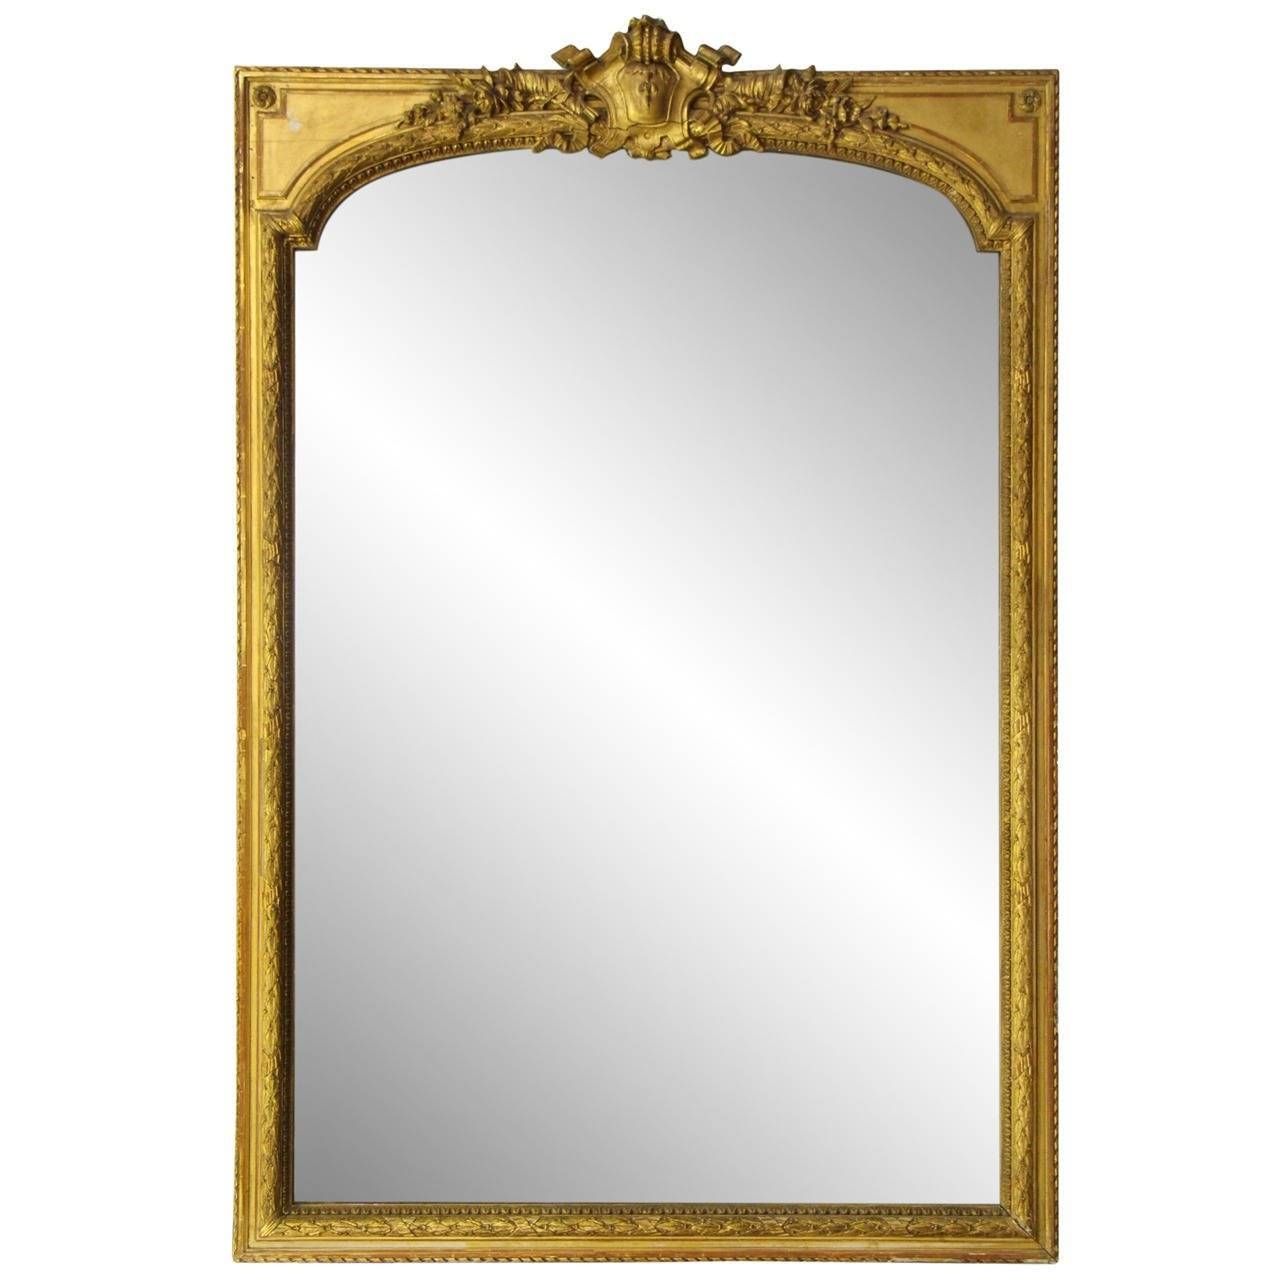 Late 1800s French Gold Gilt Ornate Mirror For Sale At 1stdibs Throughout Tall Ornate Mirrors (Photo 6 of 15)